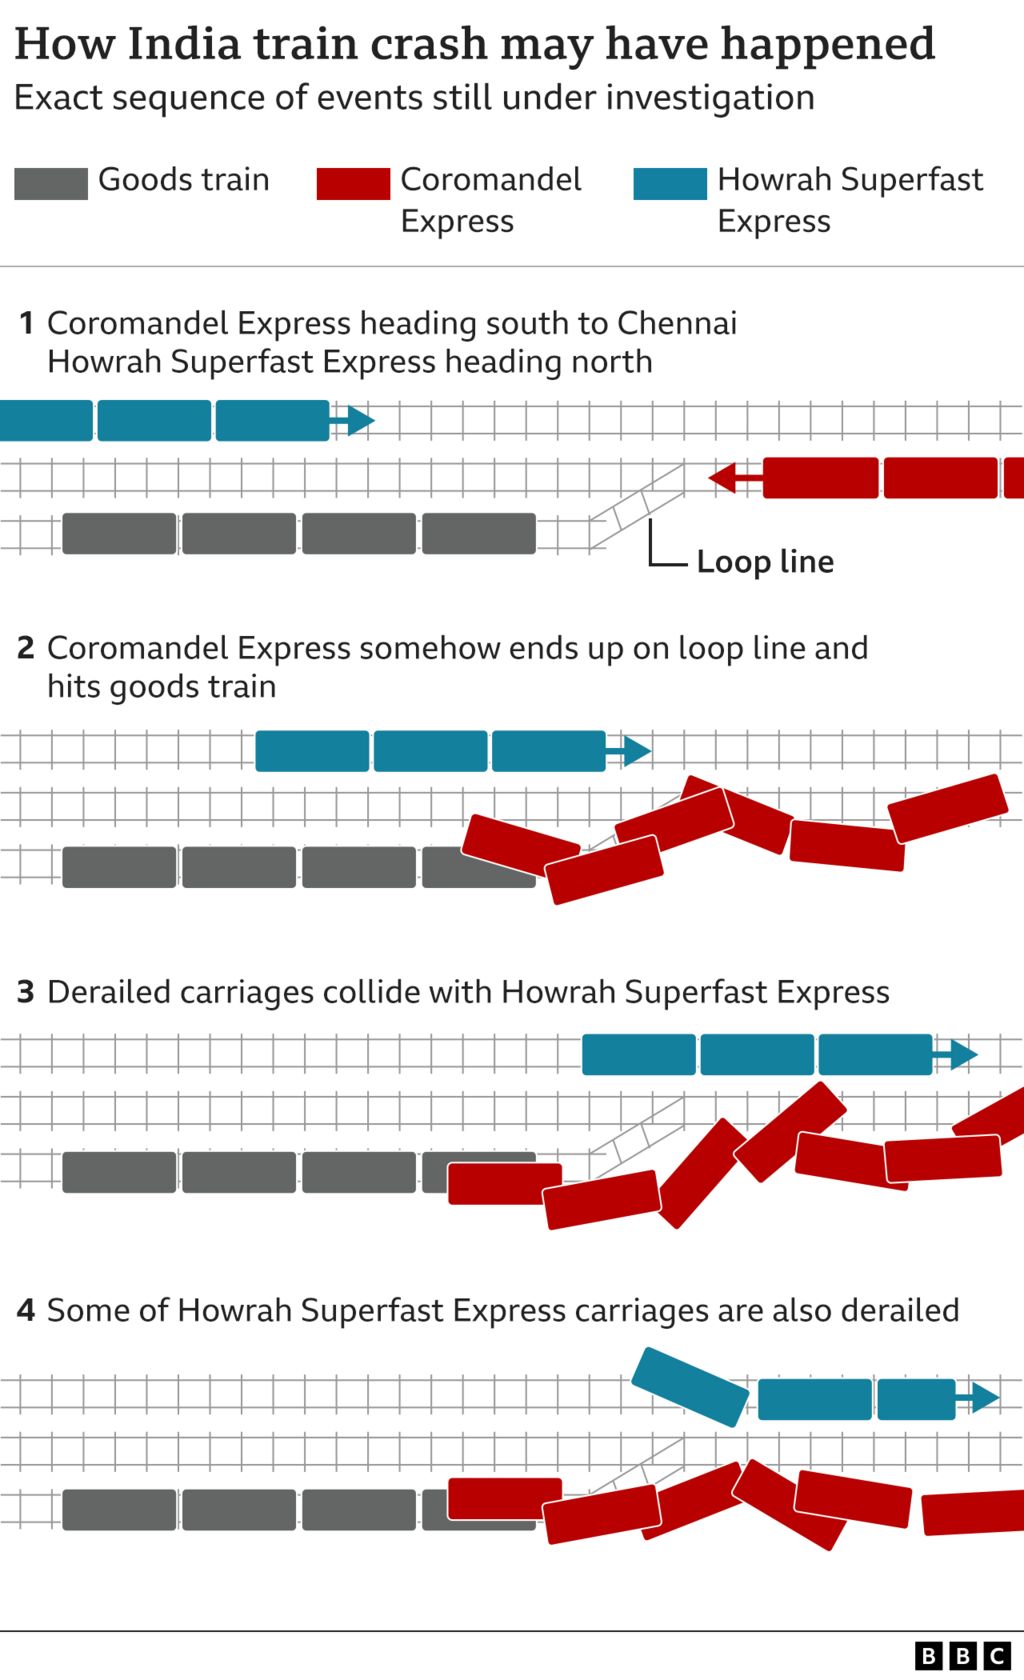 A BBC graphic shows how the crash in Odisha may have happened. The Coromandel Express first hit a goods train, although it is not clear how the two ended up on the same track. This caused the Express's carriages to derail - which were then hit by the oncoming Howrah Superfast Express, causing some of that train's own carriages to derail as well